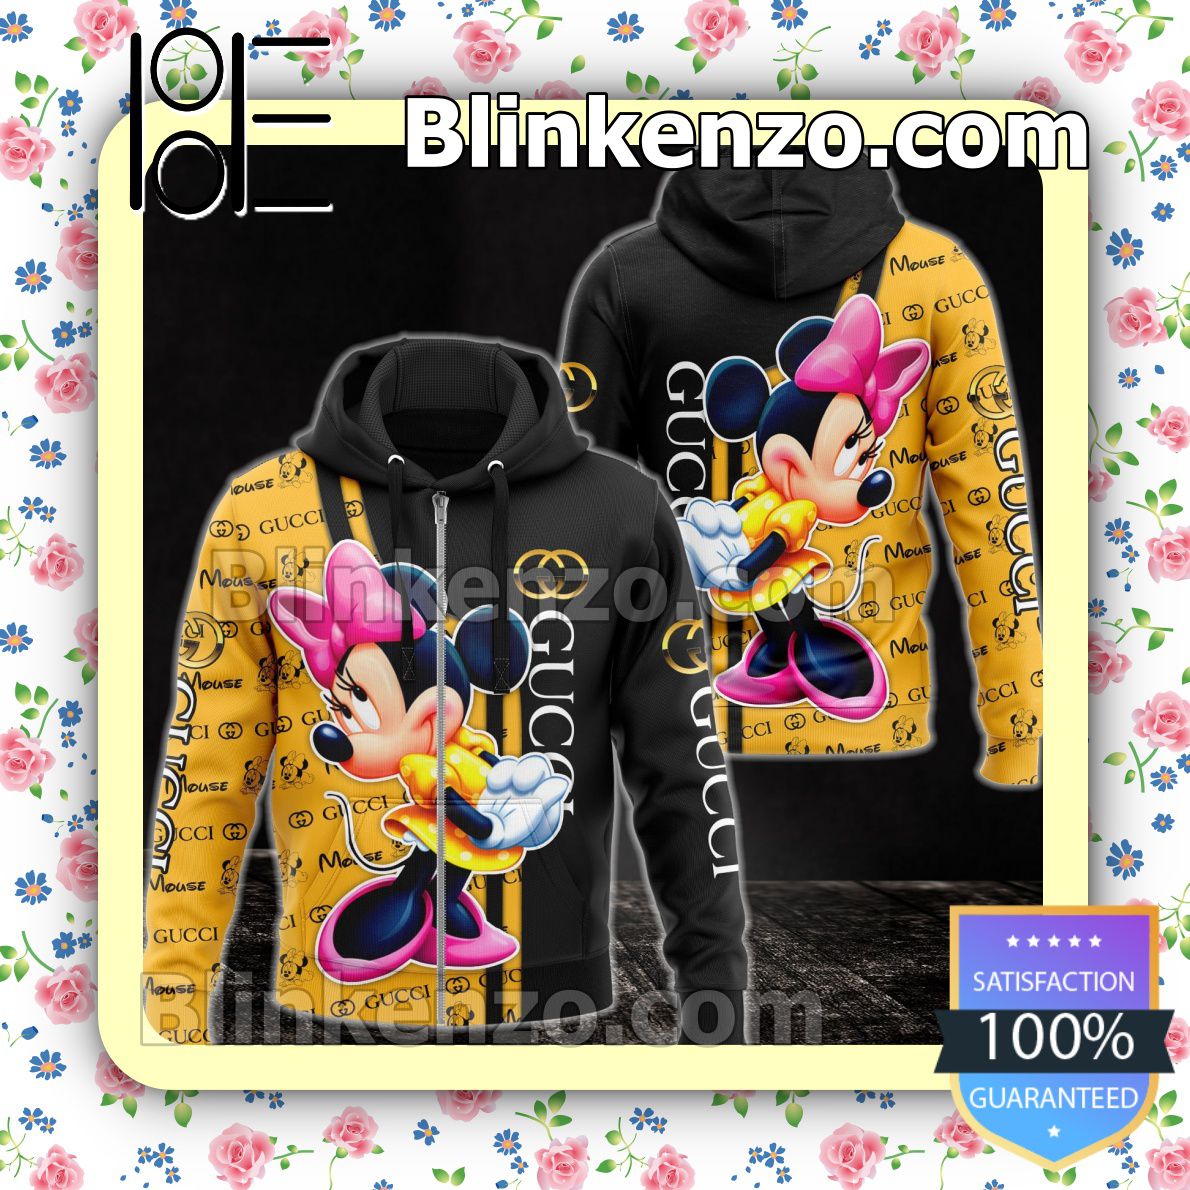 Near you Gucci With Minnie Mouse Black And Yellow Full-Zip Hooded Fleece Sweatshirt